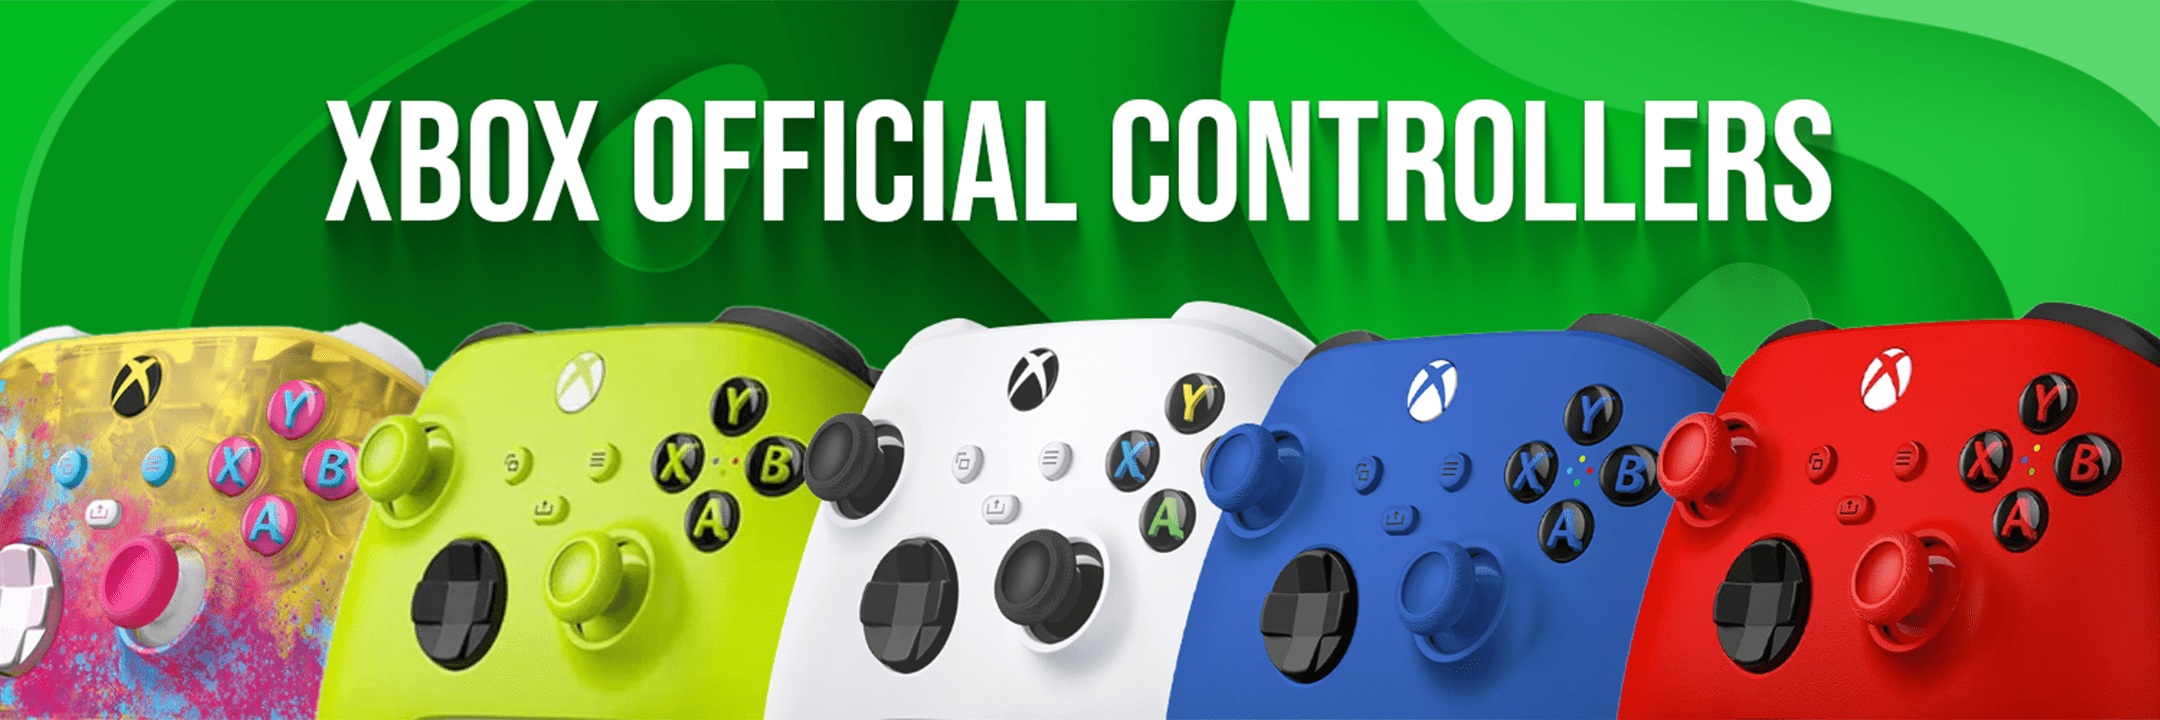 Xbox Official Controllers Desktop